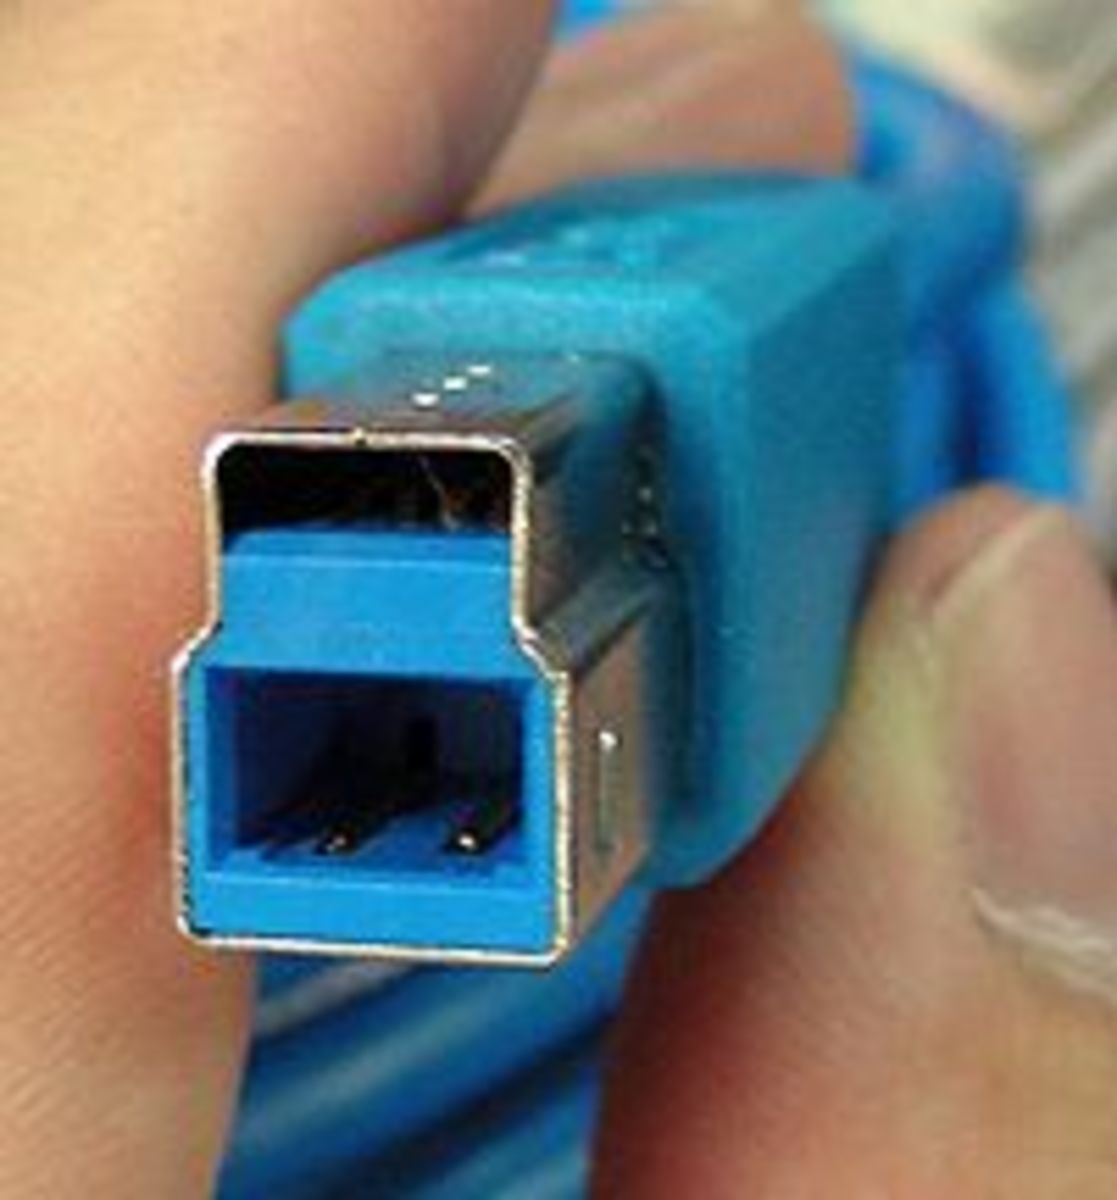 USB 3.0  plug type B for device end of cable.